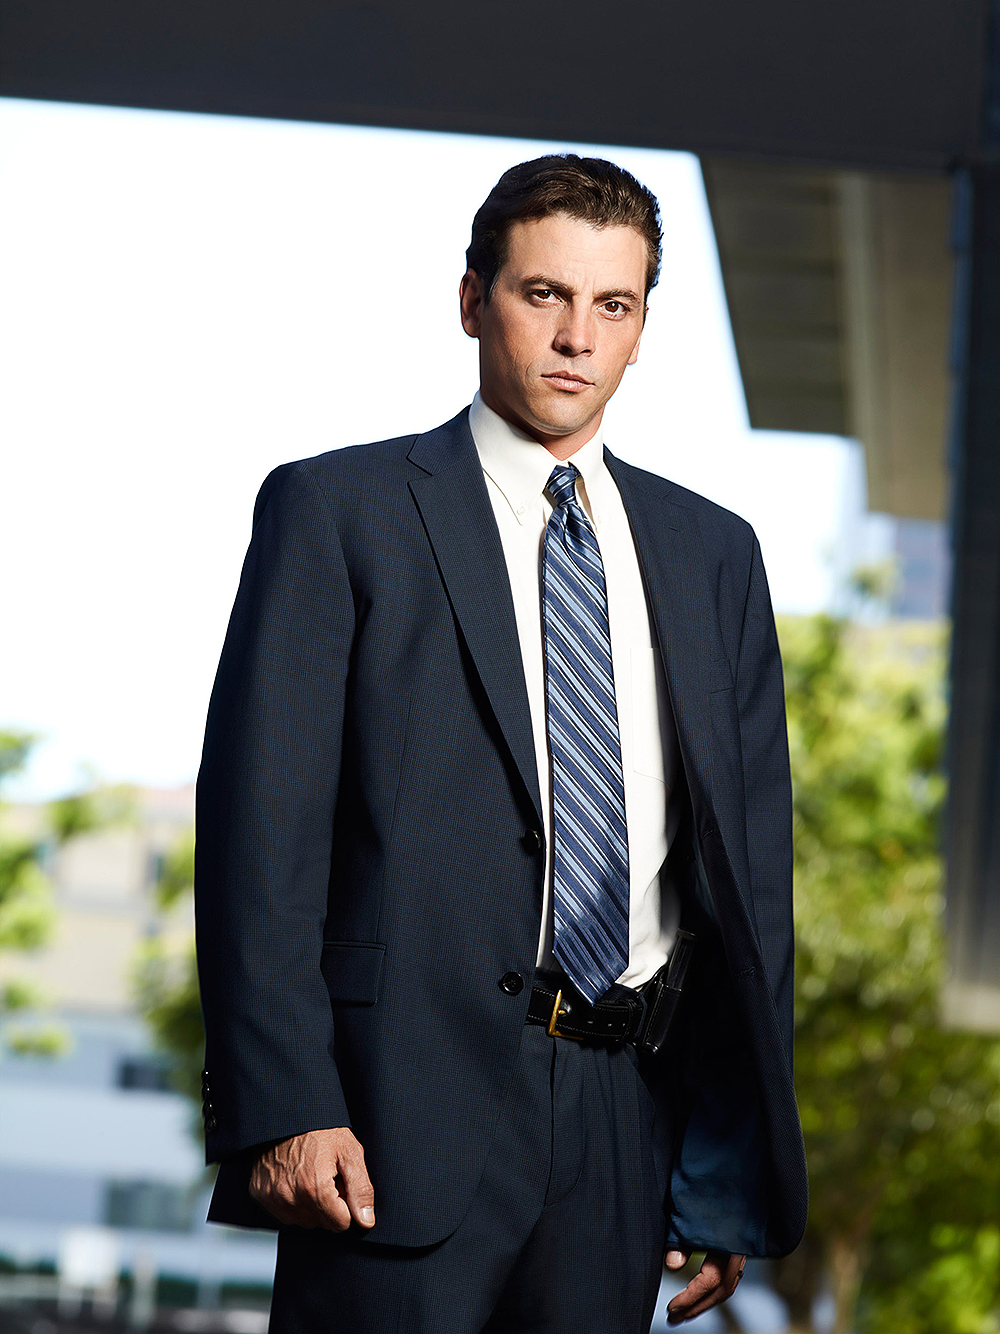 <p>Skeet Ulrich was ready for justice while starring in <em>Law & Order: Los Angeles</em>, which ran from 2010 to 2011. He reprised his character, Detective Rex Winters, who first appeared on <em>Law & Order: SVU</em>.</p>